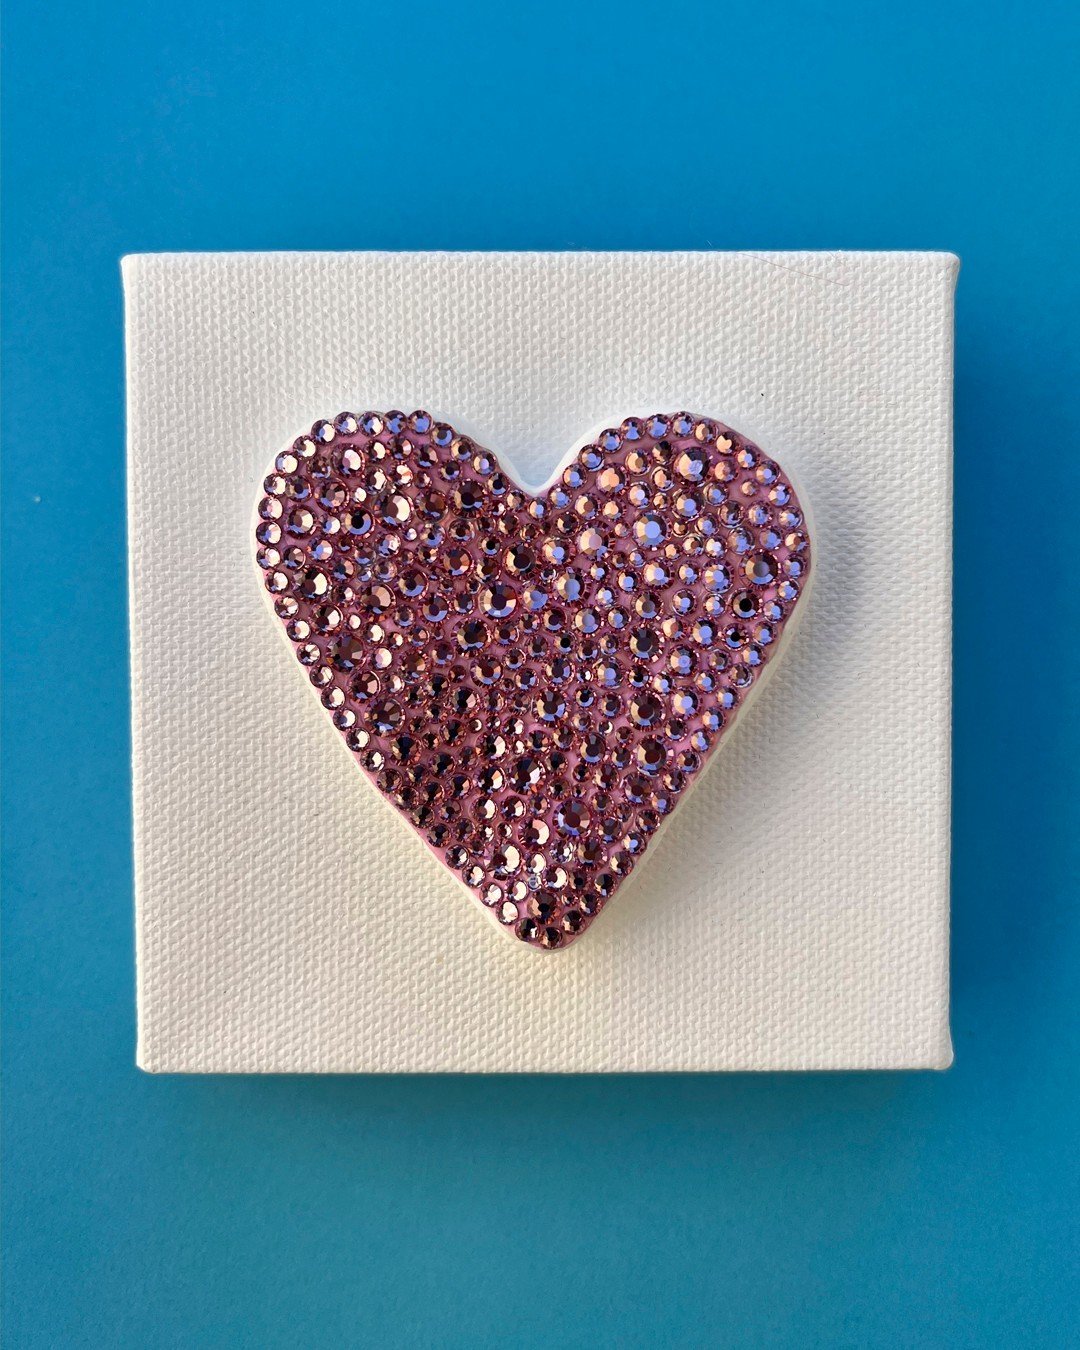 I still have some crystal pieces available including these hearts I created with @queen_of_crystal (the blue one is gone)⁠
⁠
Yesterday at @theperezardistrict someone inquired about them - if you are interested please head to my website shop. If you'd